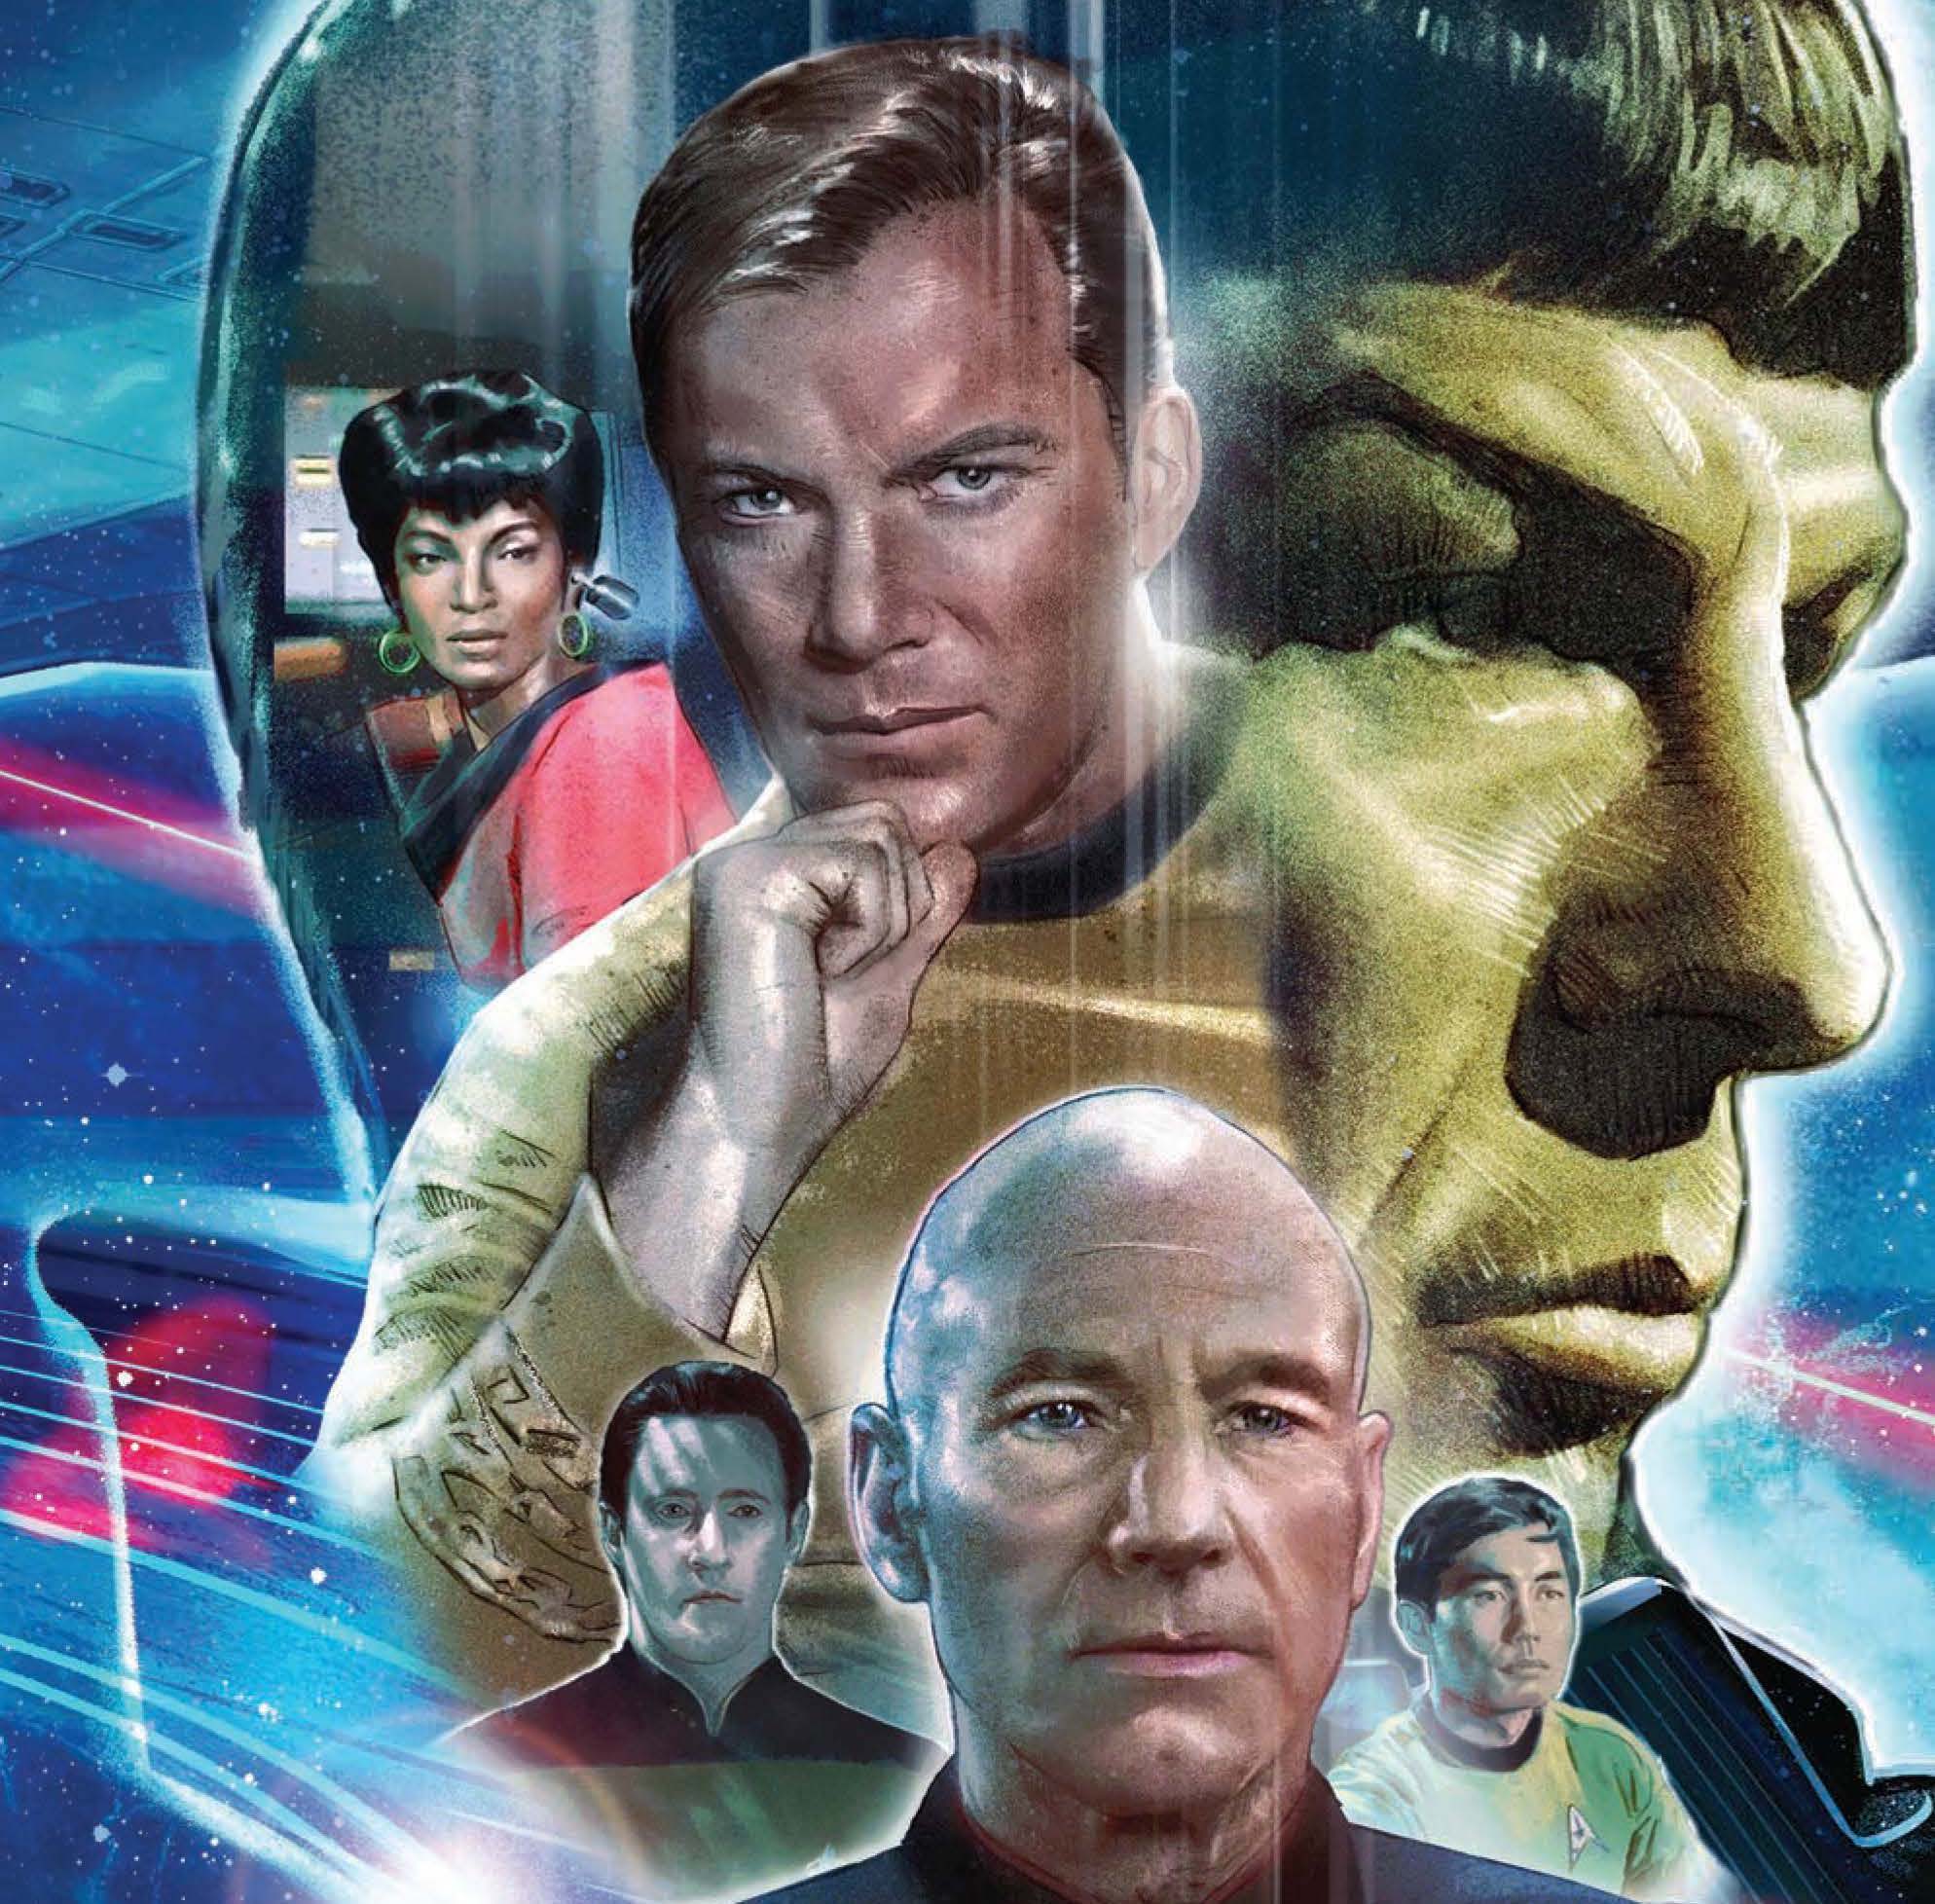 'Star Trek' #400 offers must-read tales, honors the past, and sets up the future